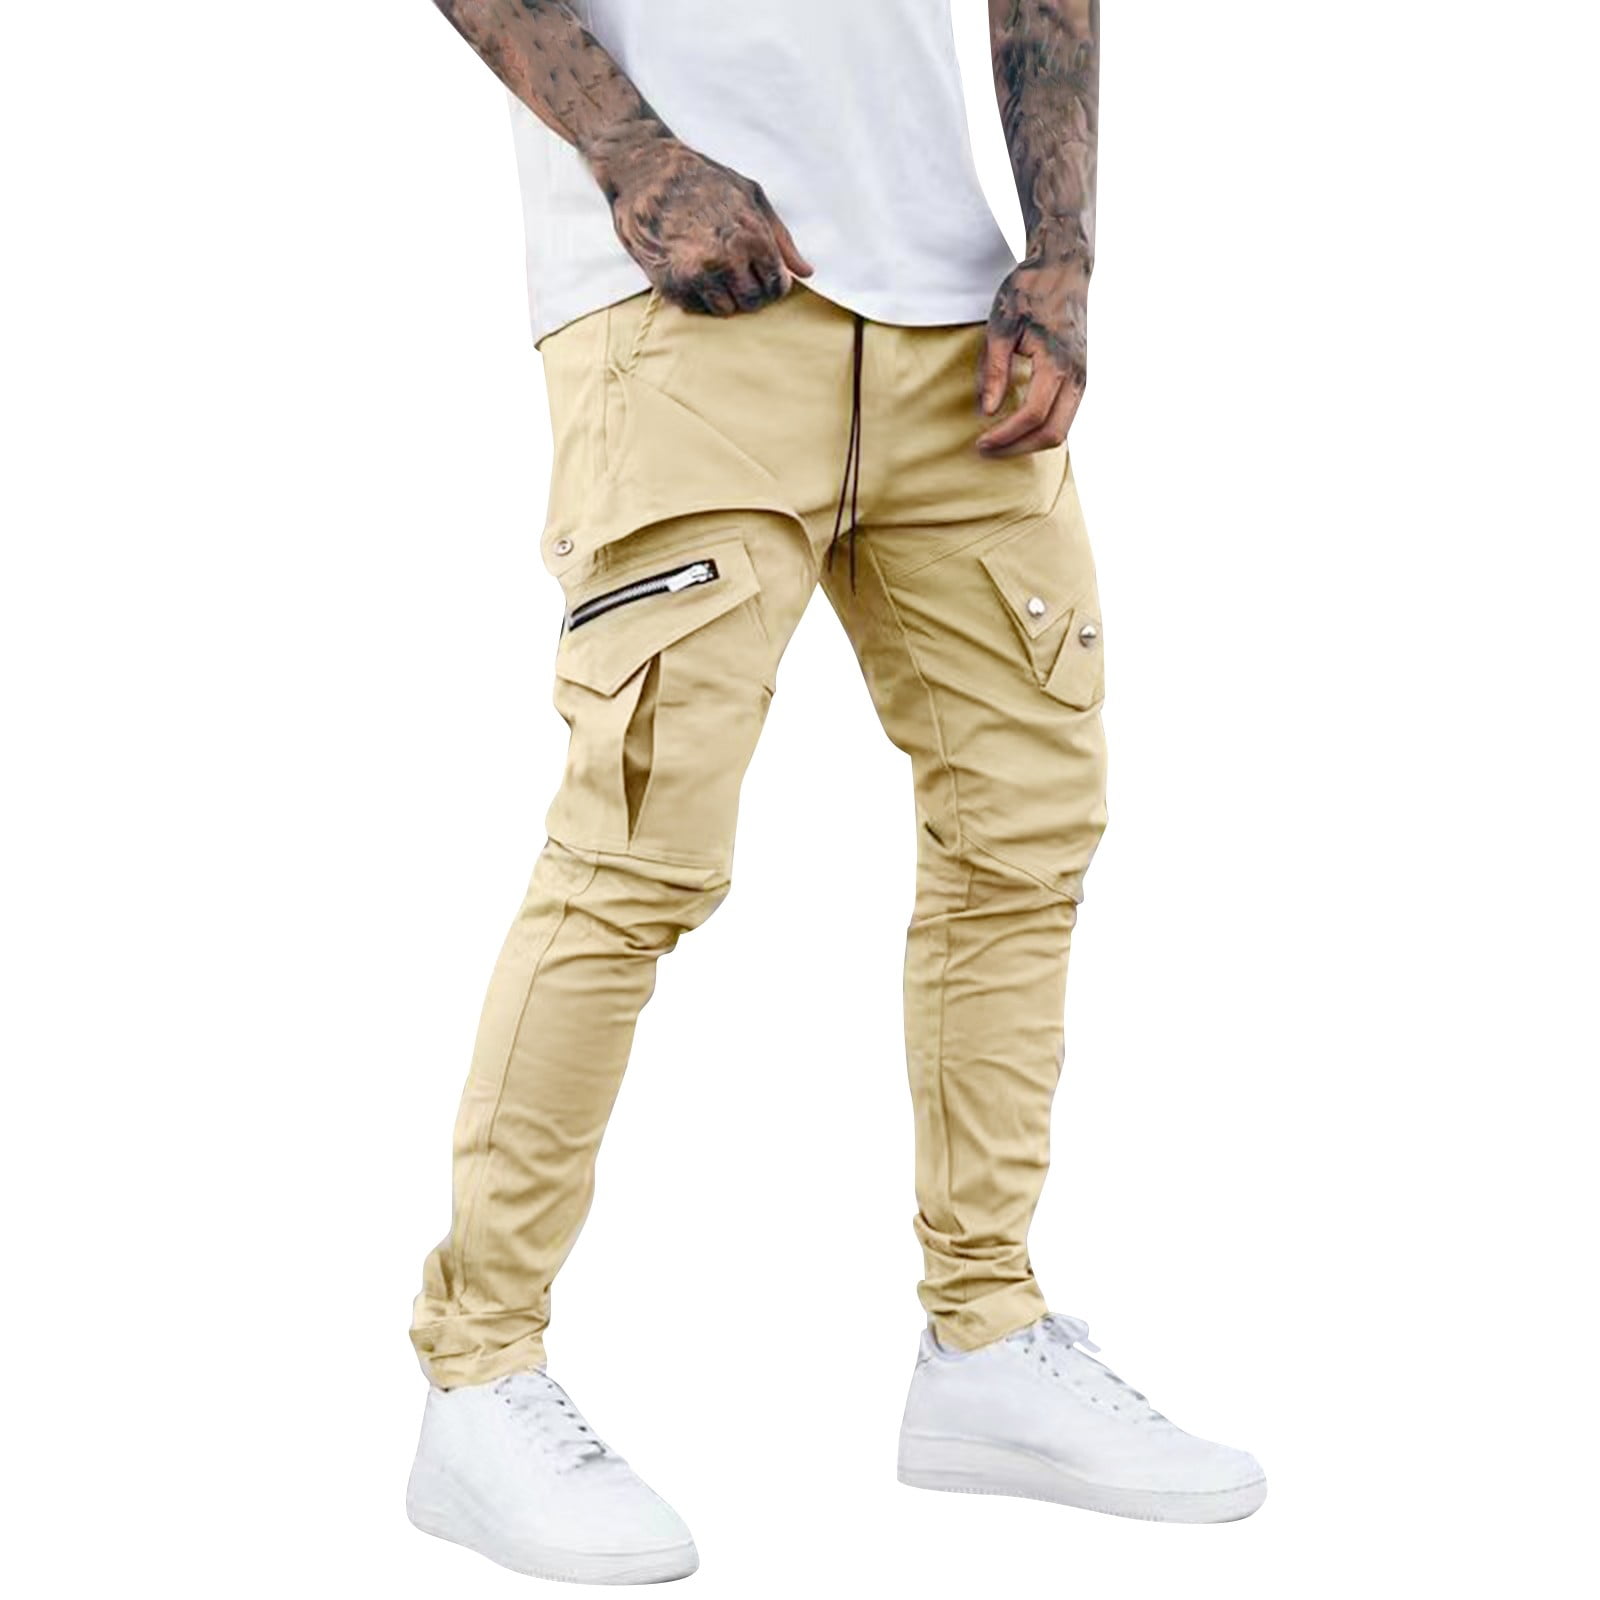 fvwitlyh Gym Pants Men Men's Cotton Relaxed Fit Full Elastic Waist Twill  Pants 